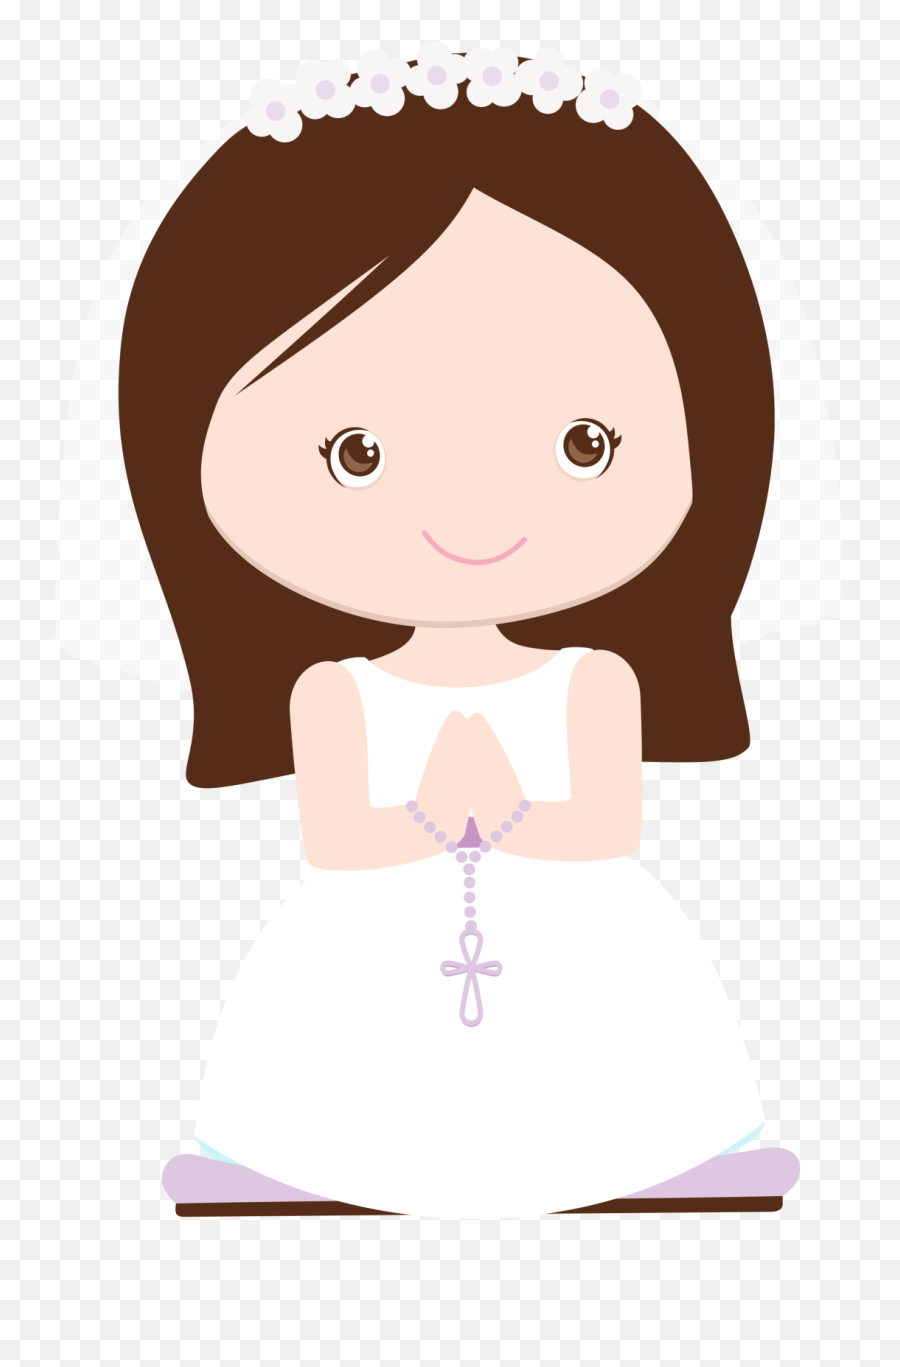 Clipart Communion Girl Png Wave Hair 1 Image - Clipart Communion Girl Png Wave Hair,Waves Hair Png